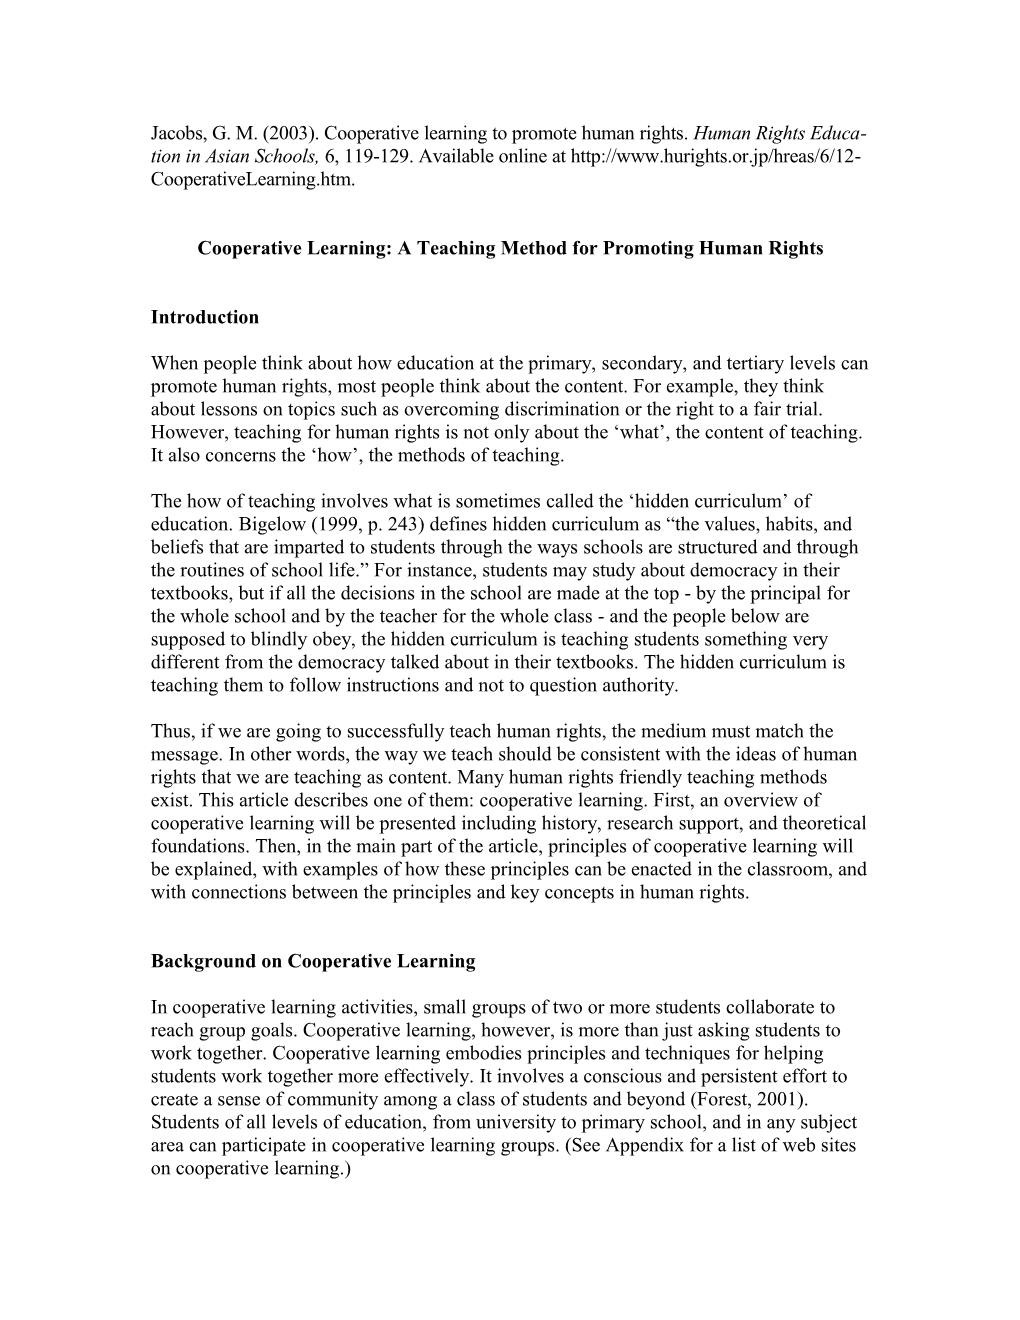 Cooperative Learning: a Teaching Method for Promoting Human Rights